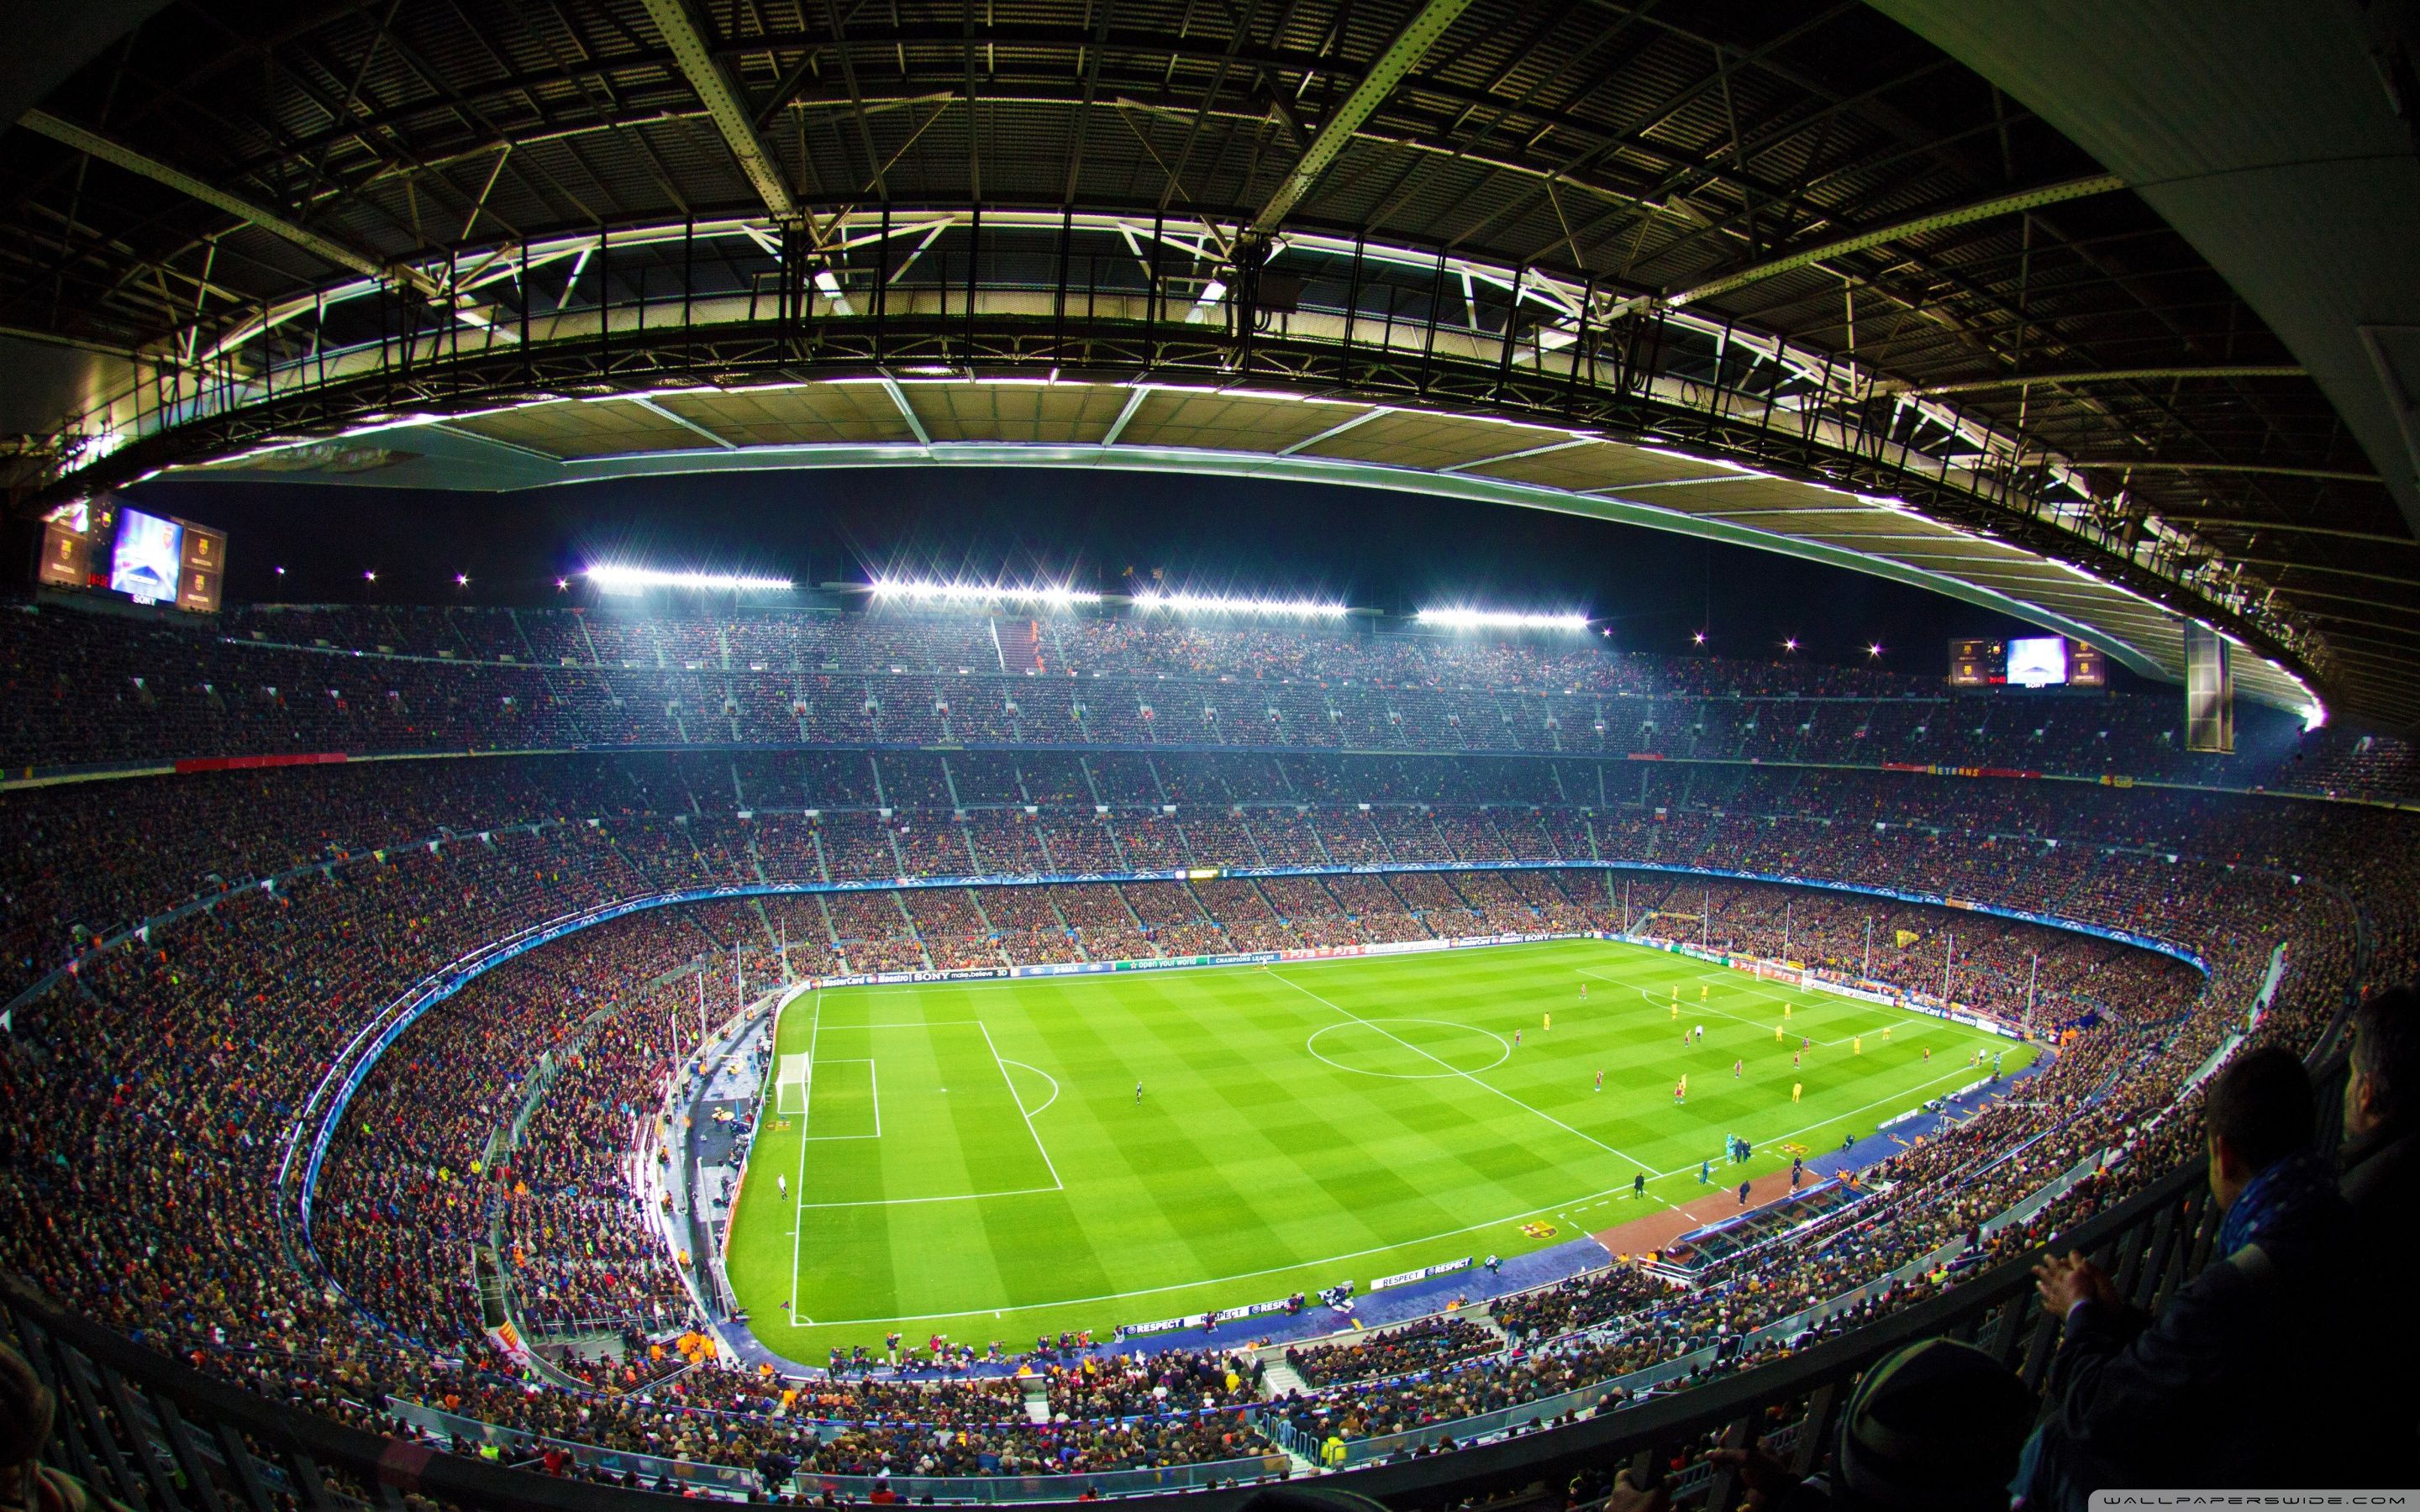 A large stadium with many people in it - Soccer